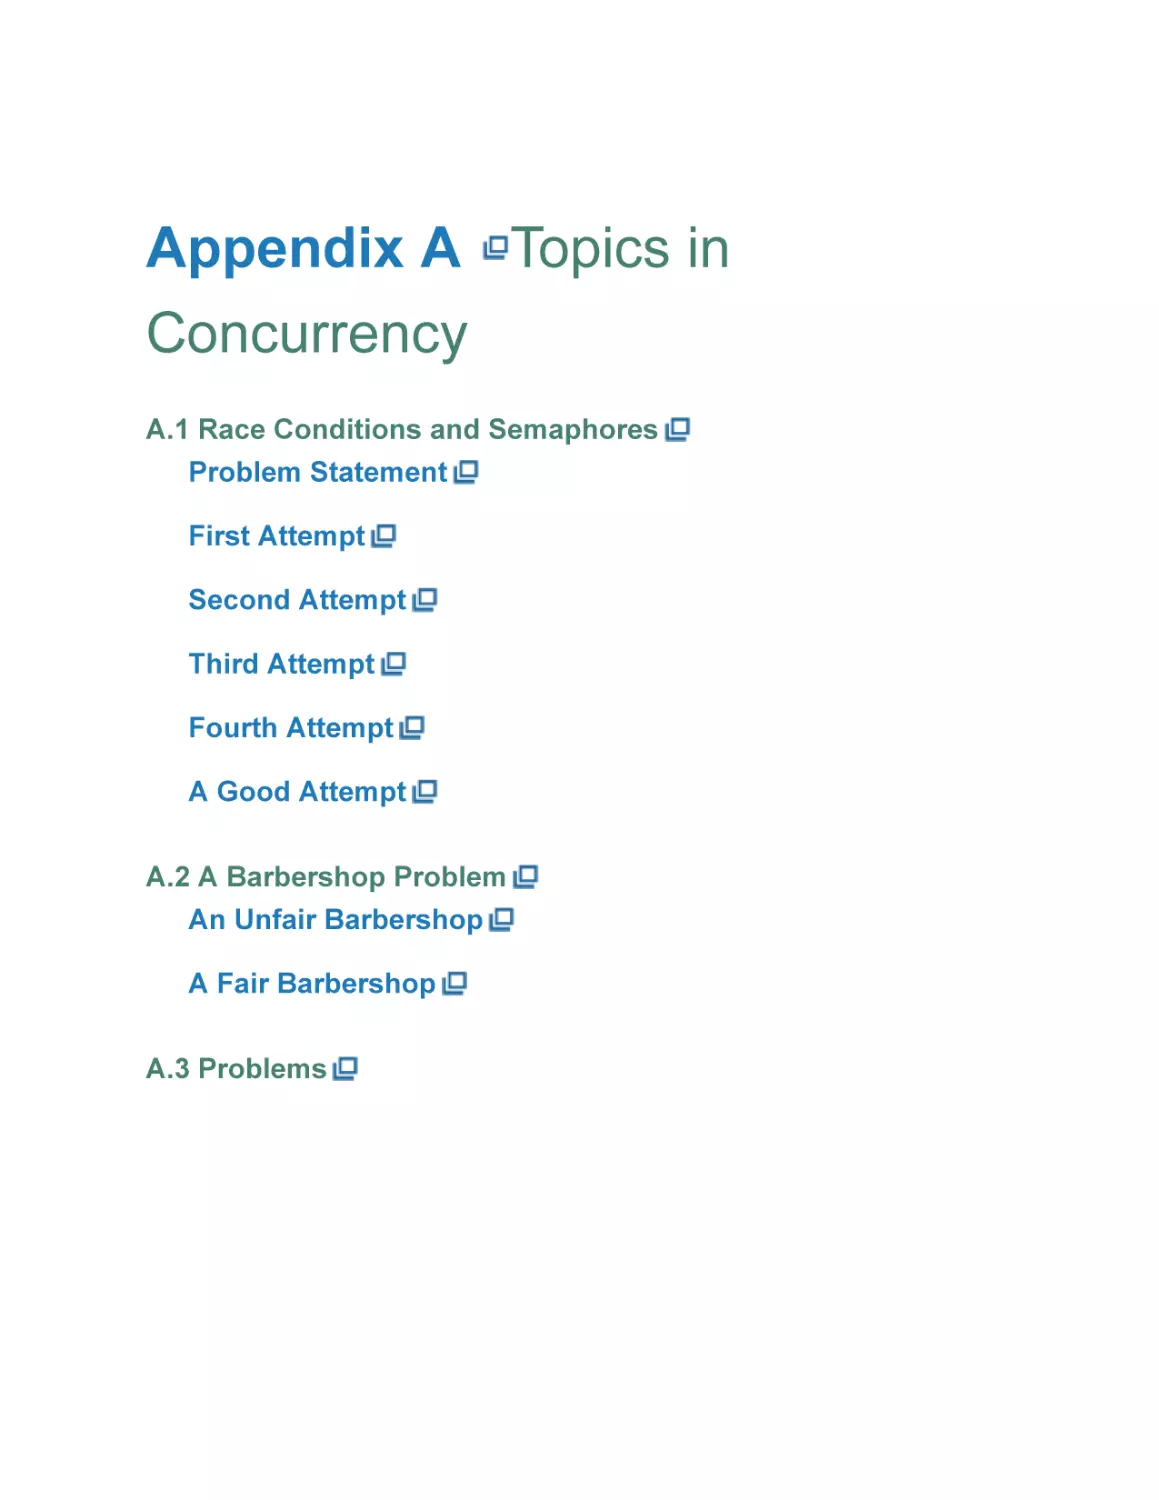 Appendix A Topics in Concurrency